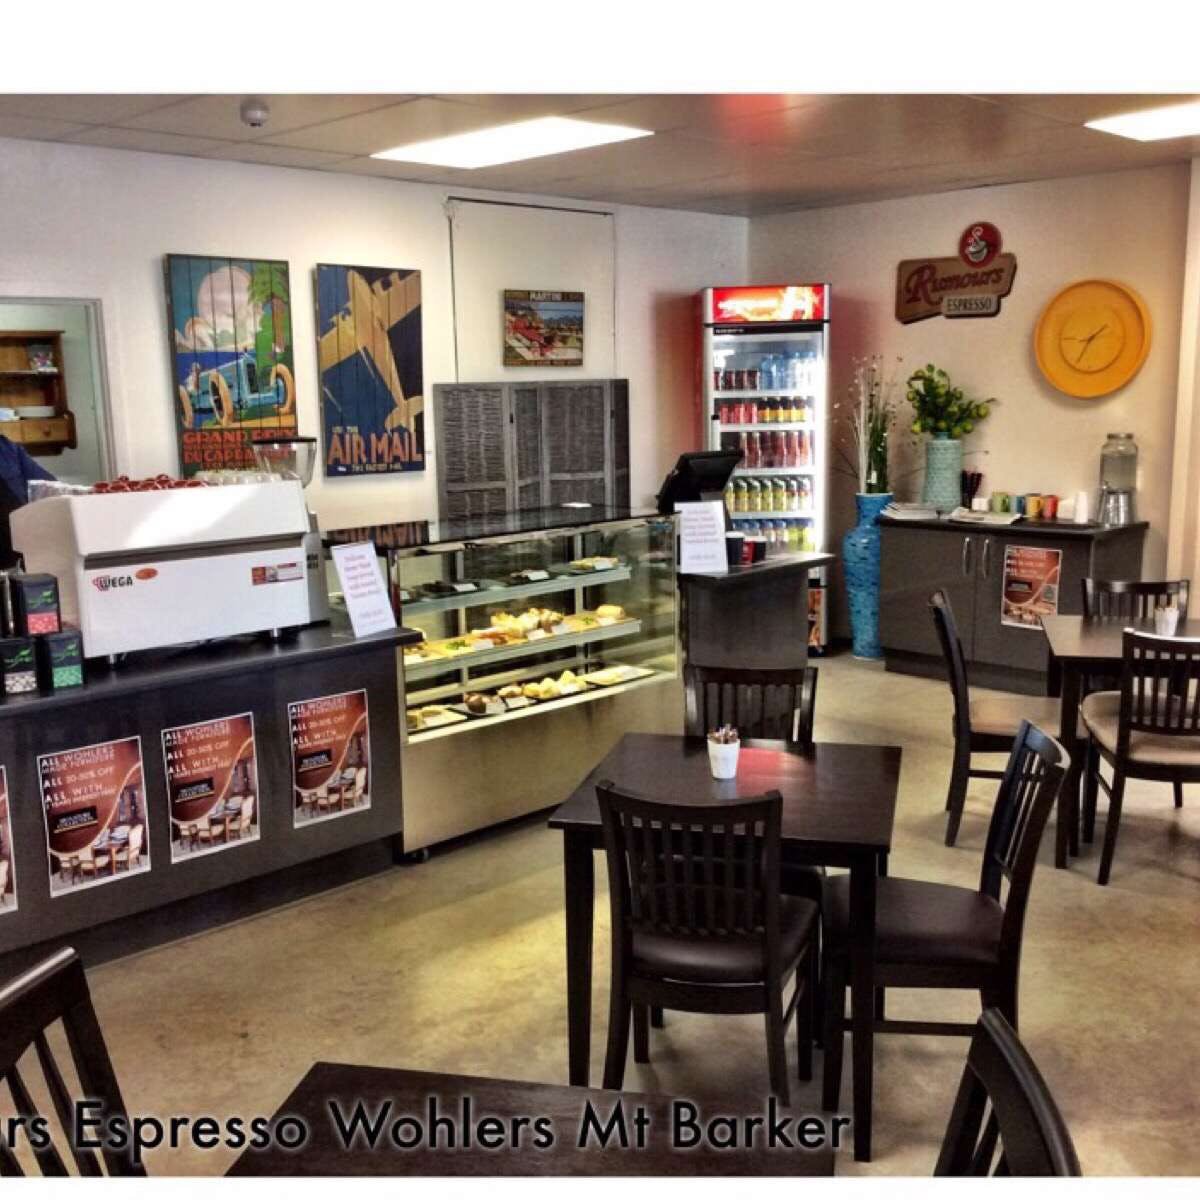 Rumours Espresso - Wohlers - Mount Barker - Northern Rivers Accommodation